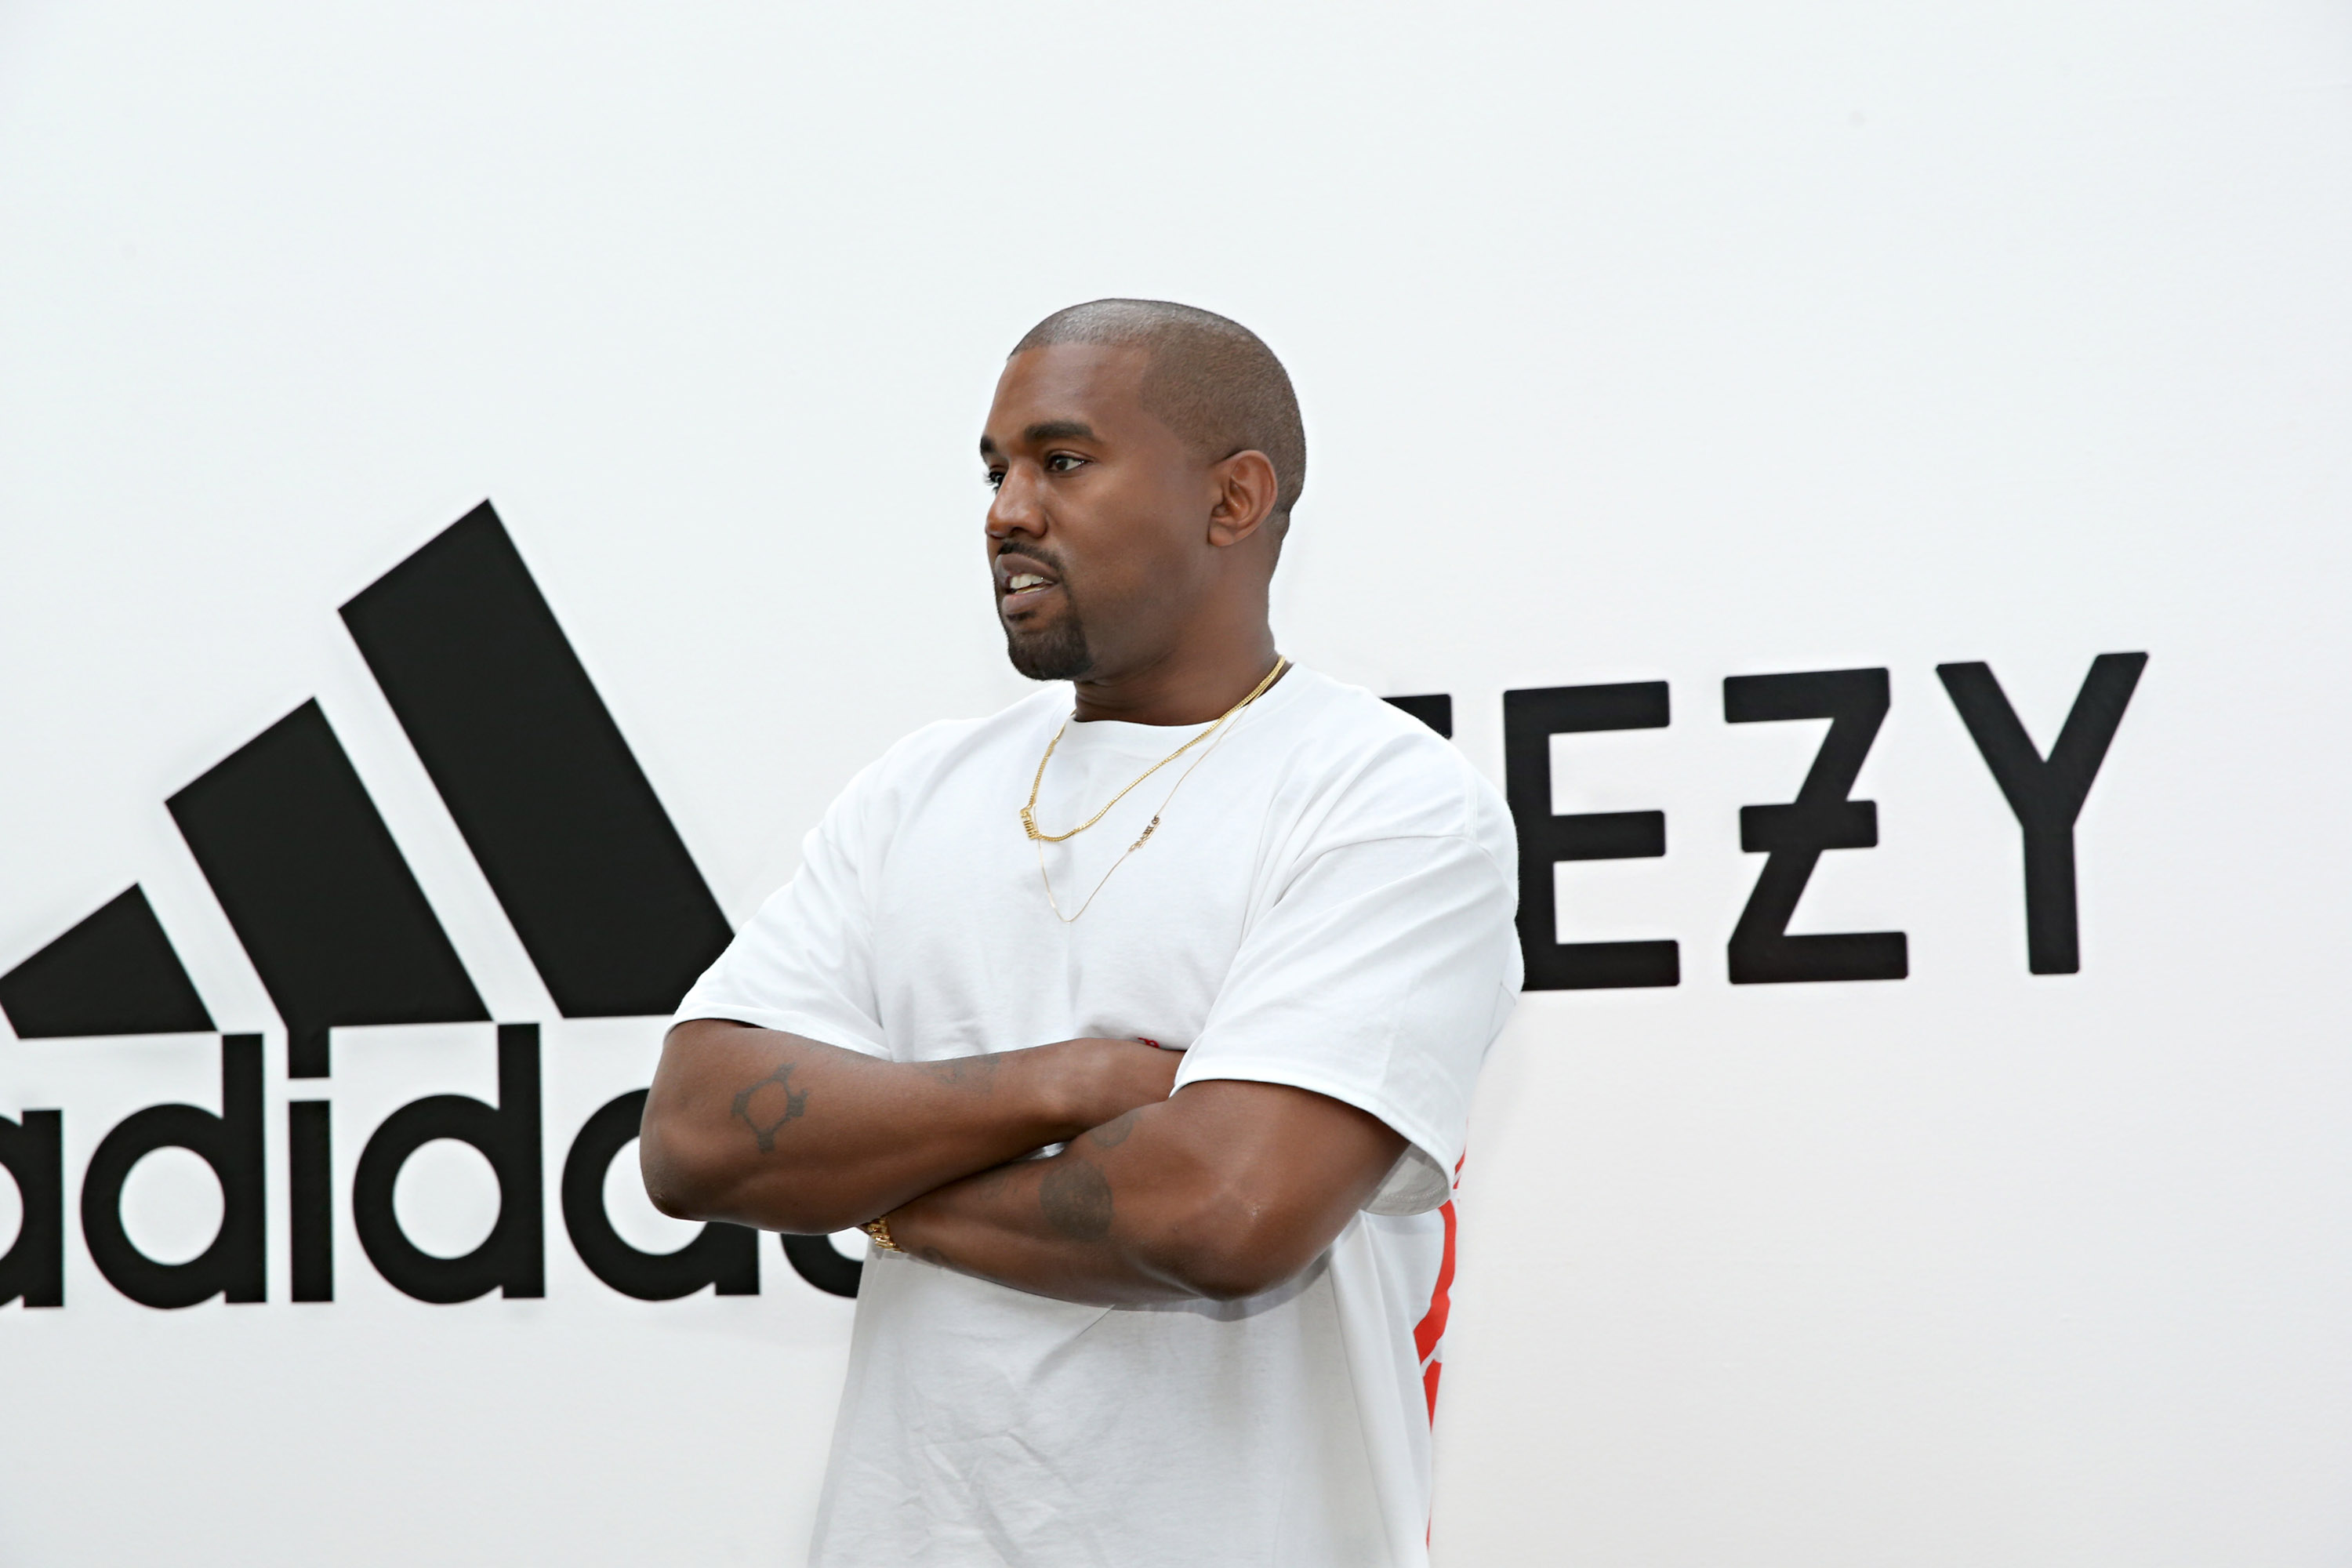 Unsold Yeezy shoes piling up in warehouses after Adidas split with